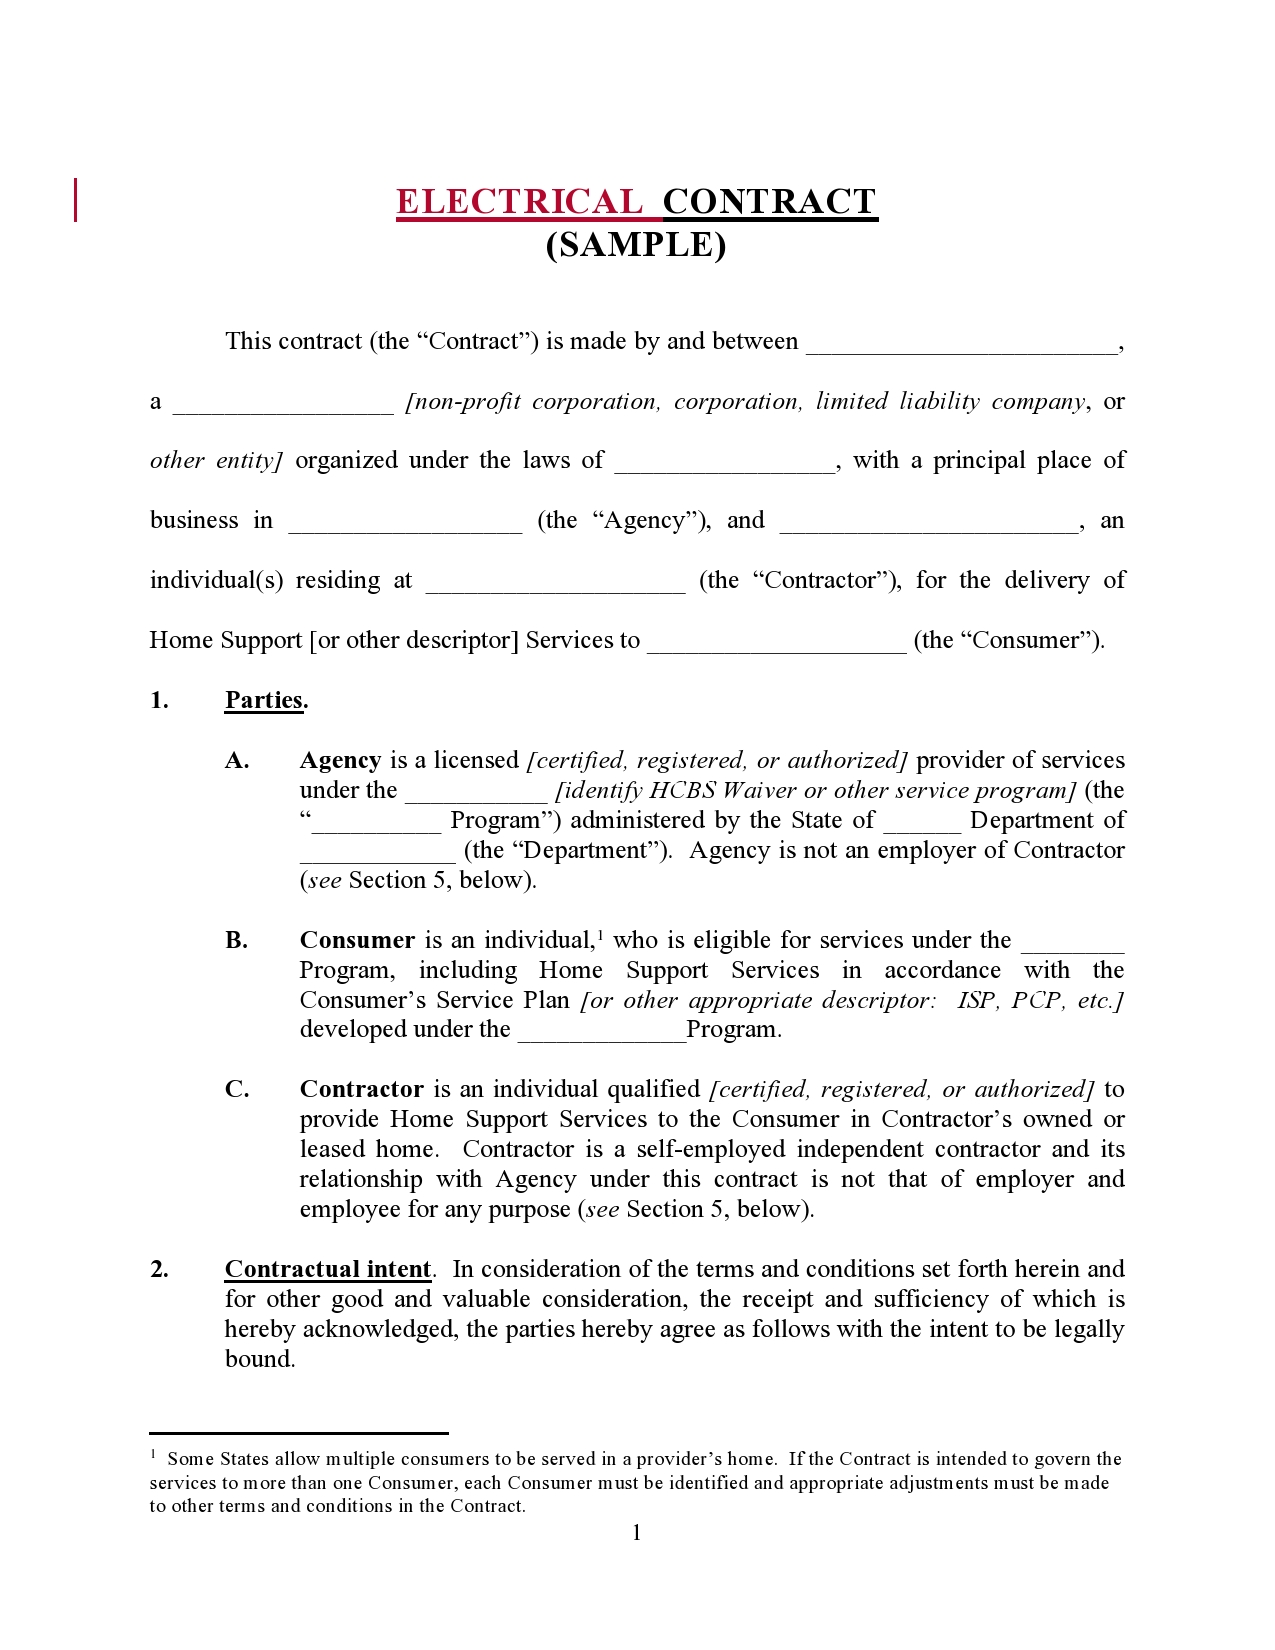 Free electrical contract 32